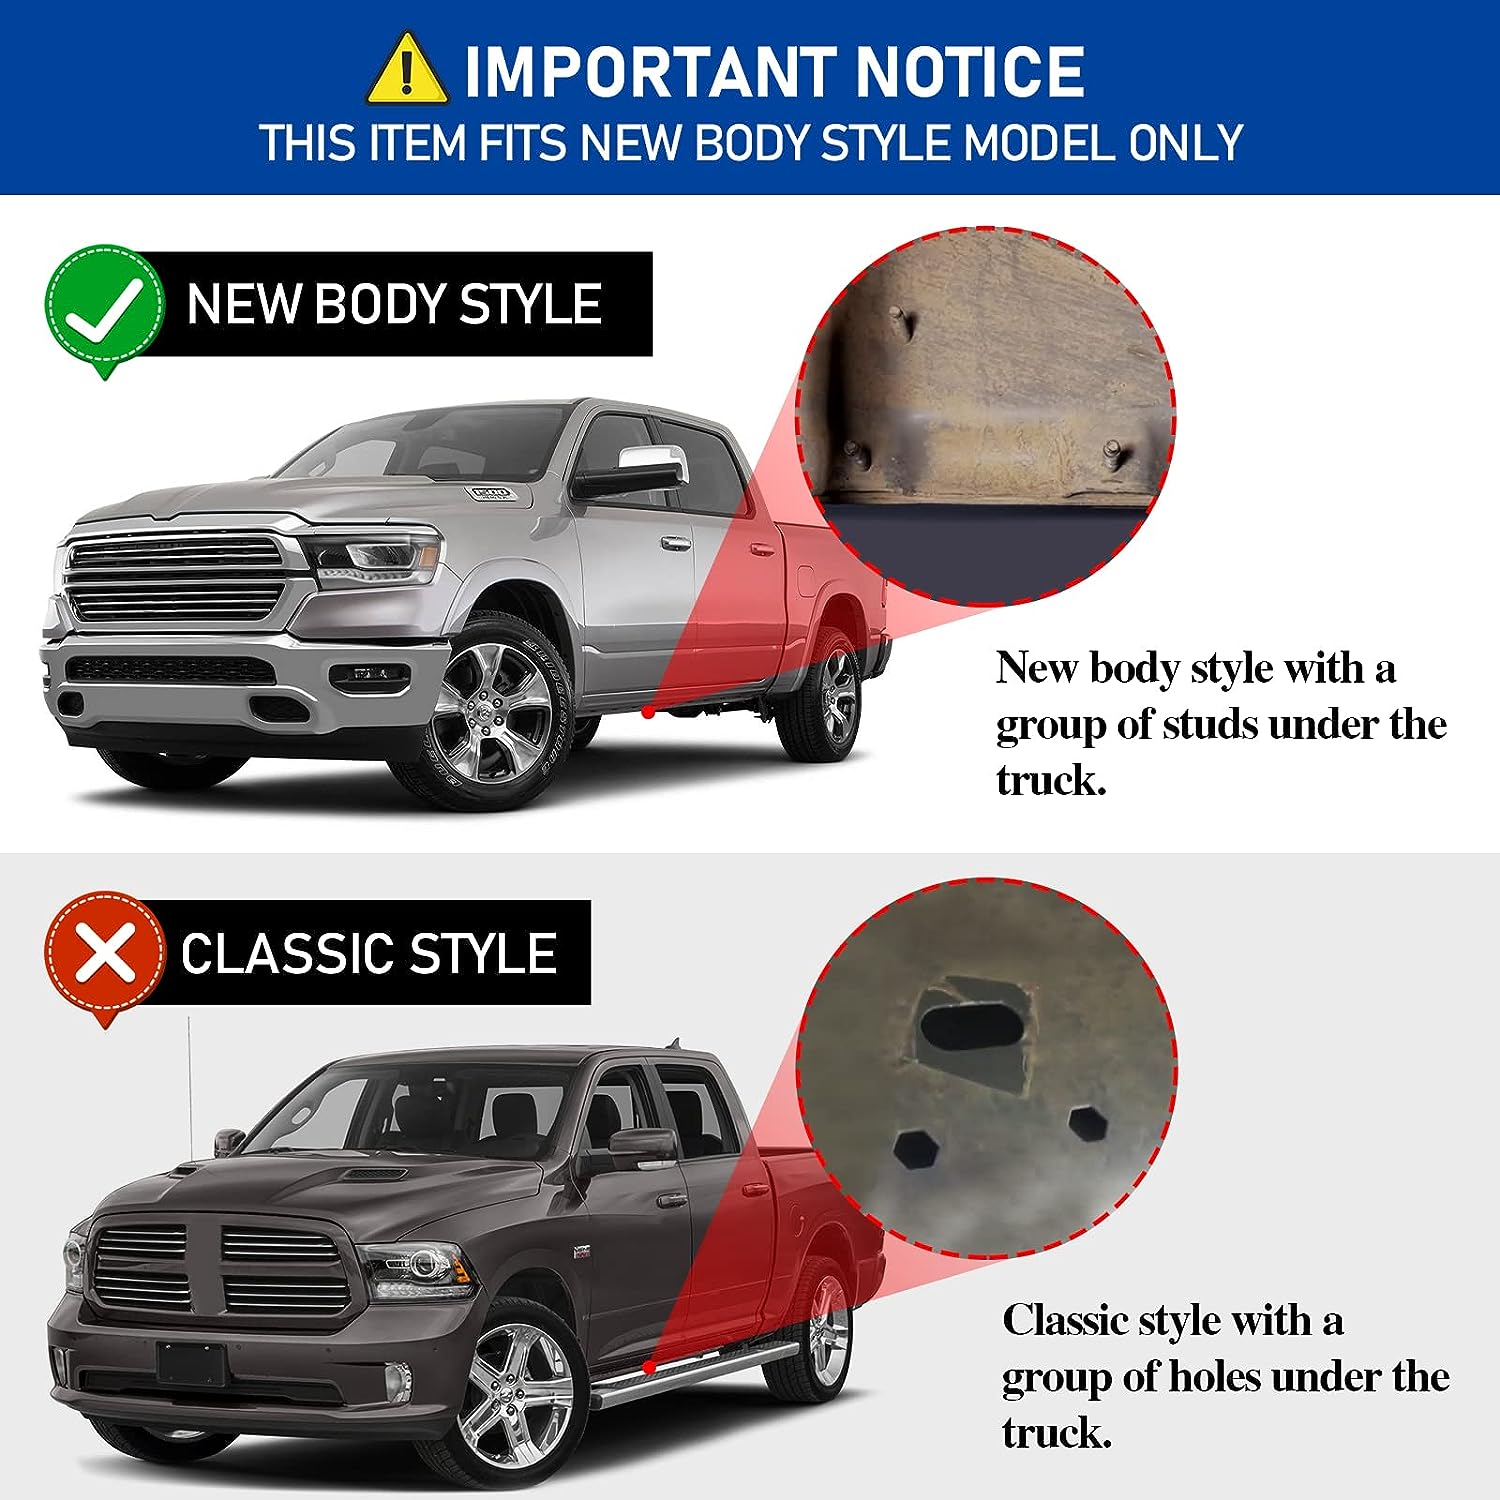 Running Boards Compatible with 2019-2024 RAM 1500 Running Boards Crew Cab Side Steps D7 Style.- COMNOVA AUTOPART